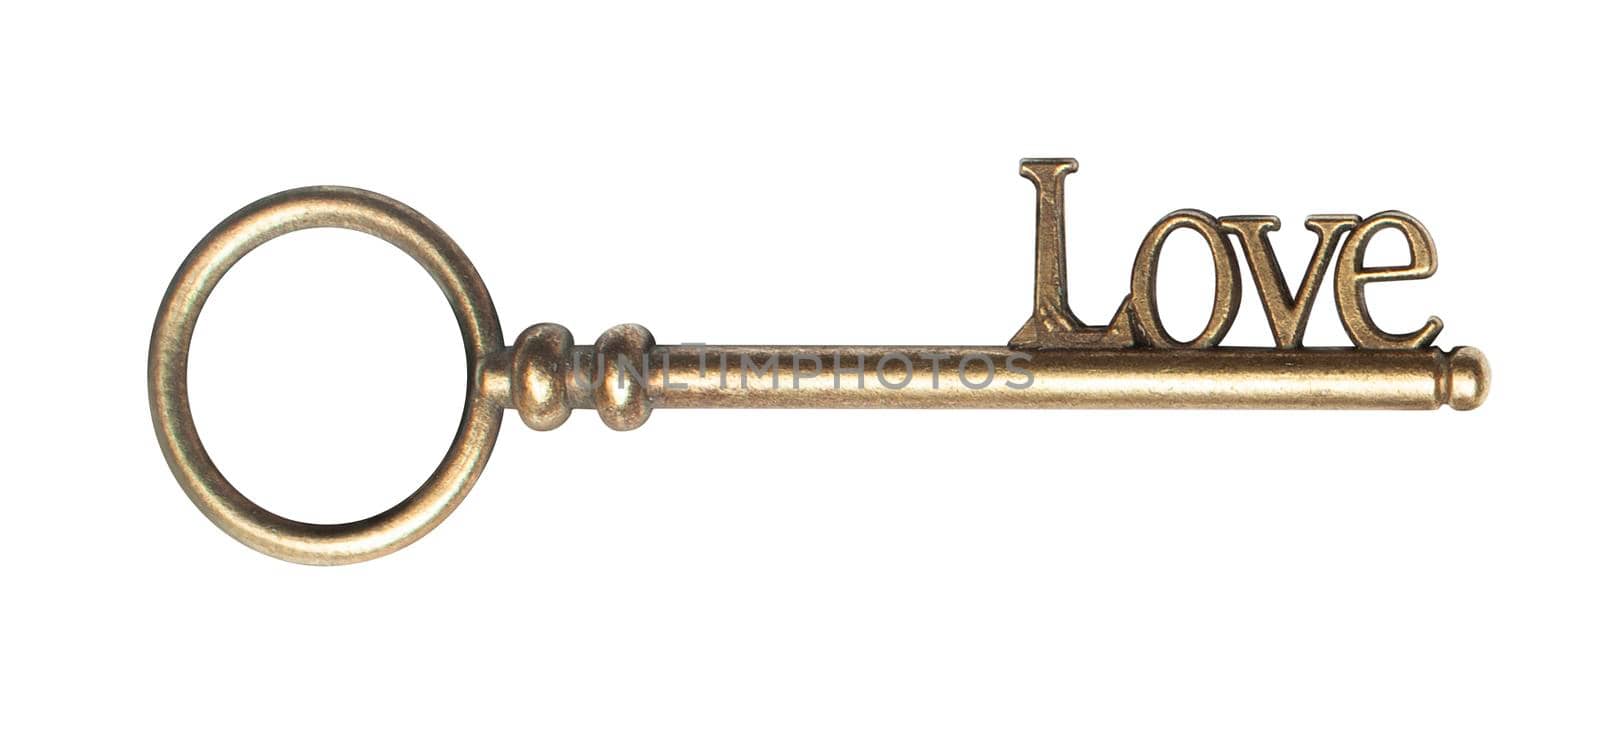 key old vintage with the inscription love by SlayCer